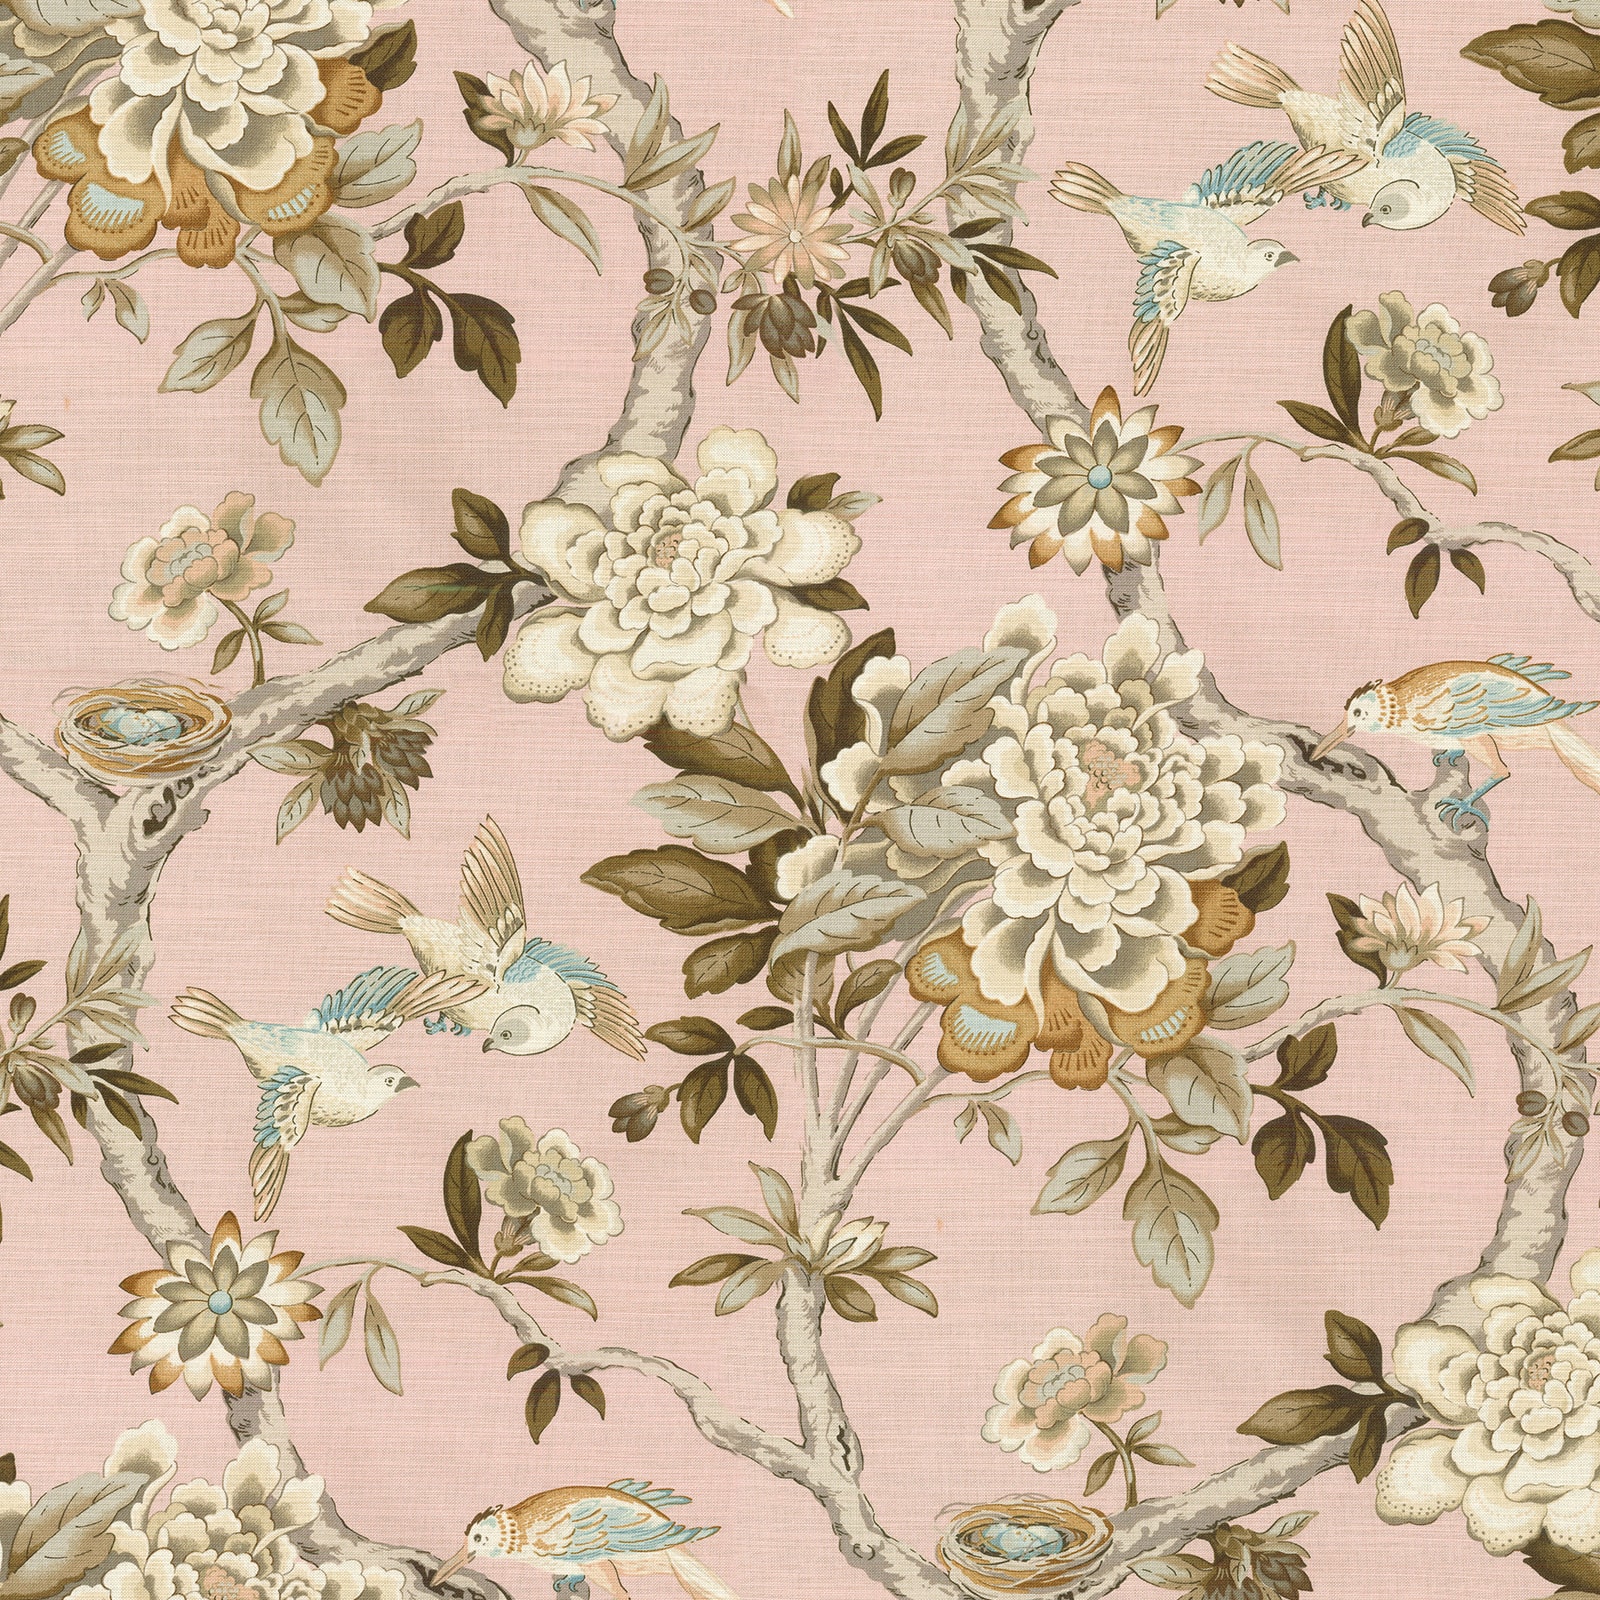 Look for the Waverly Mudan Blush Floral Home Décor Fabric at Michaels